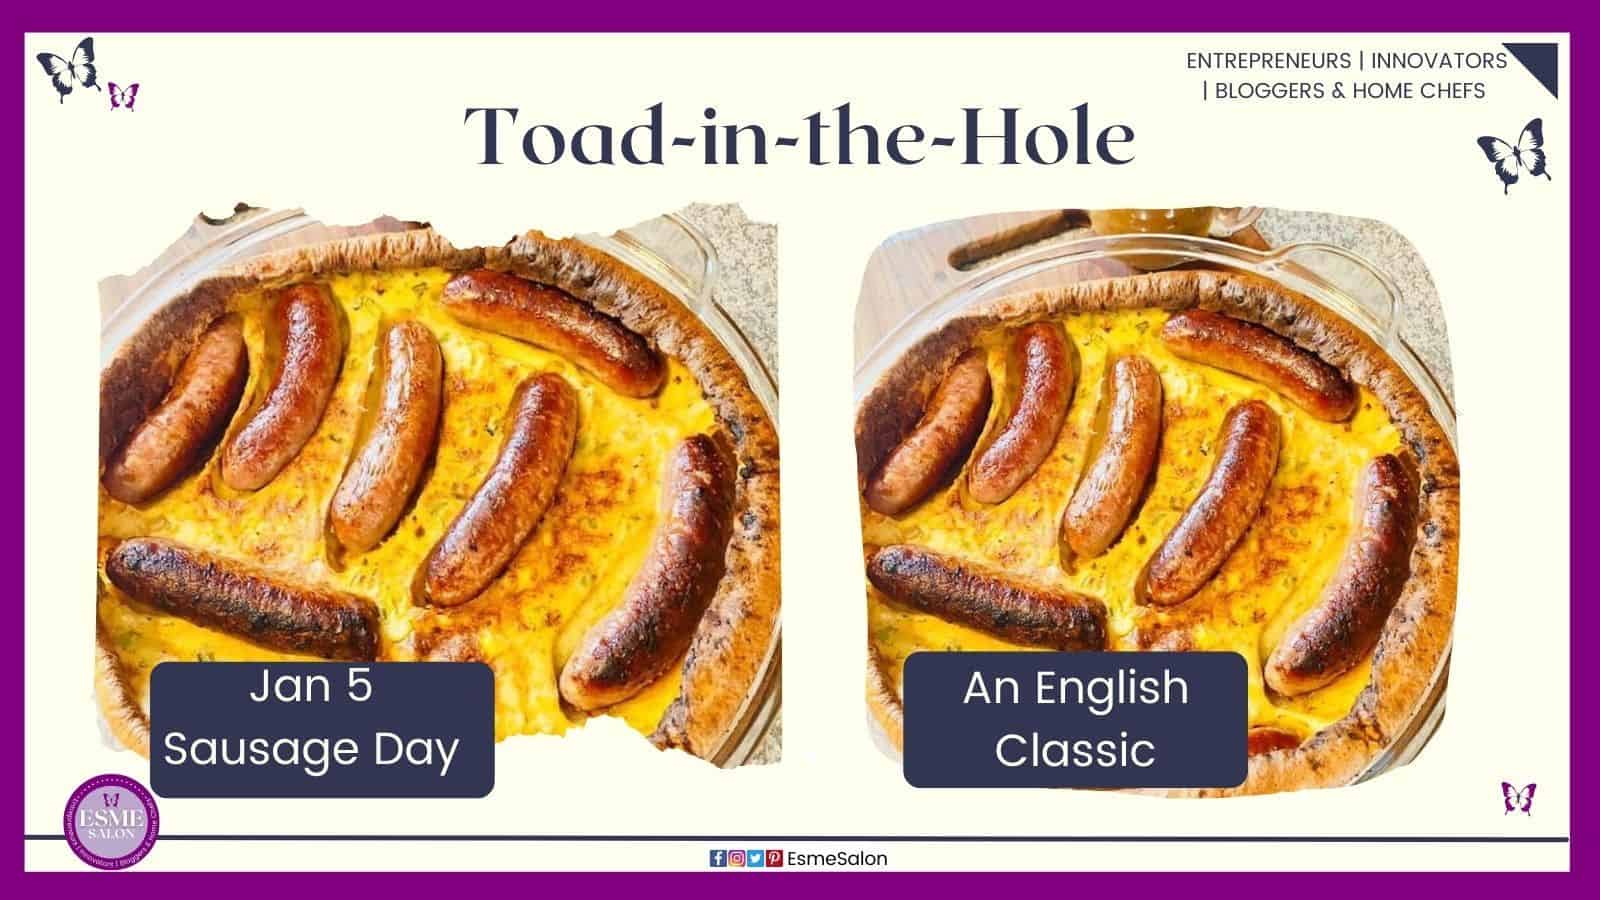 an image of a plate with Toad-in-the-Hole, an English Classic